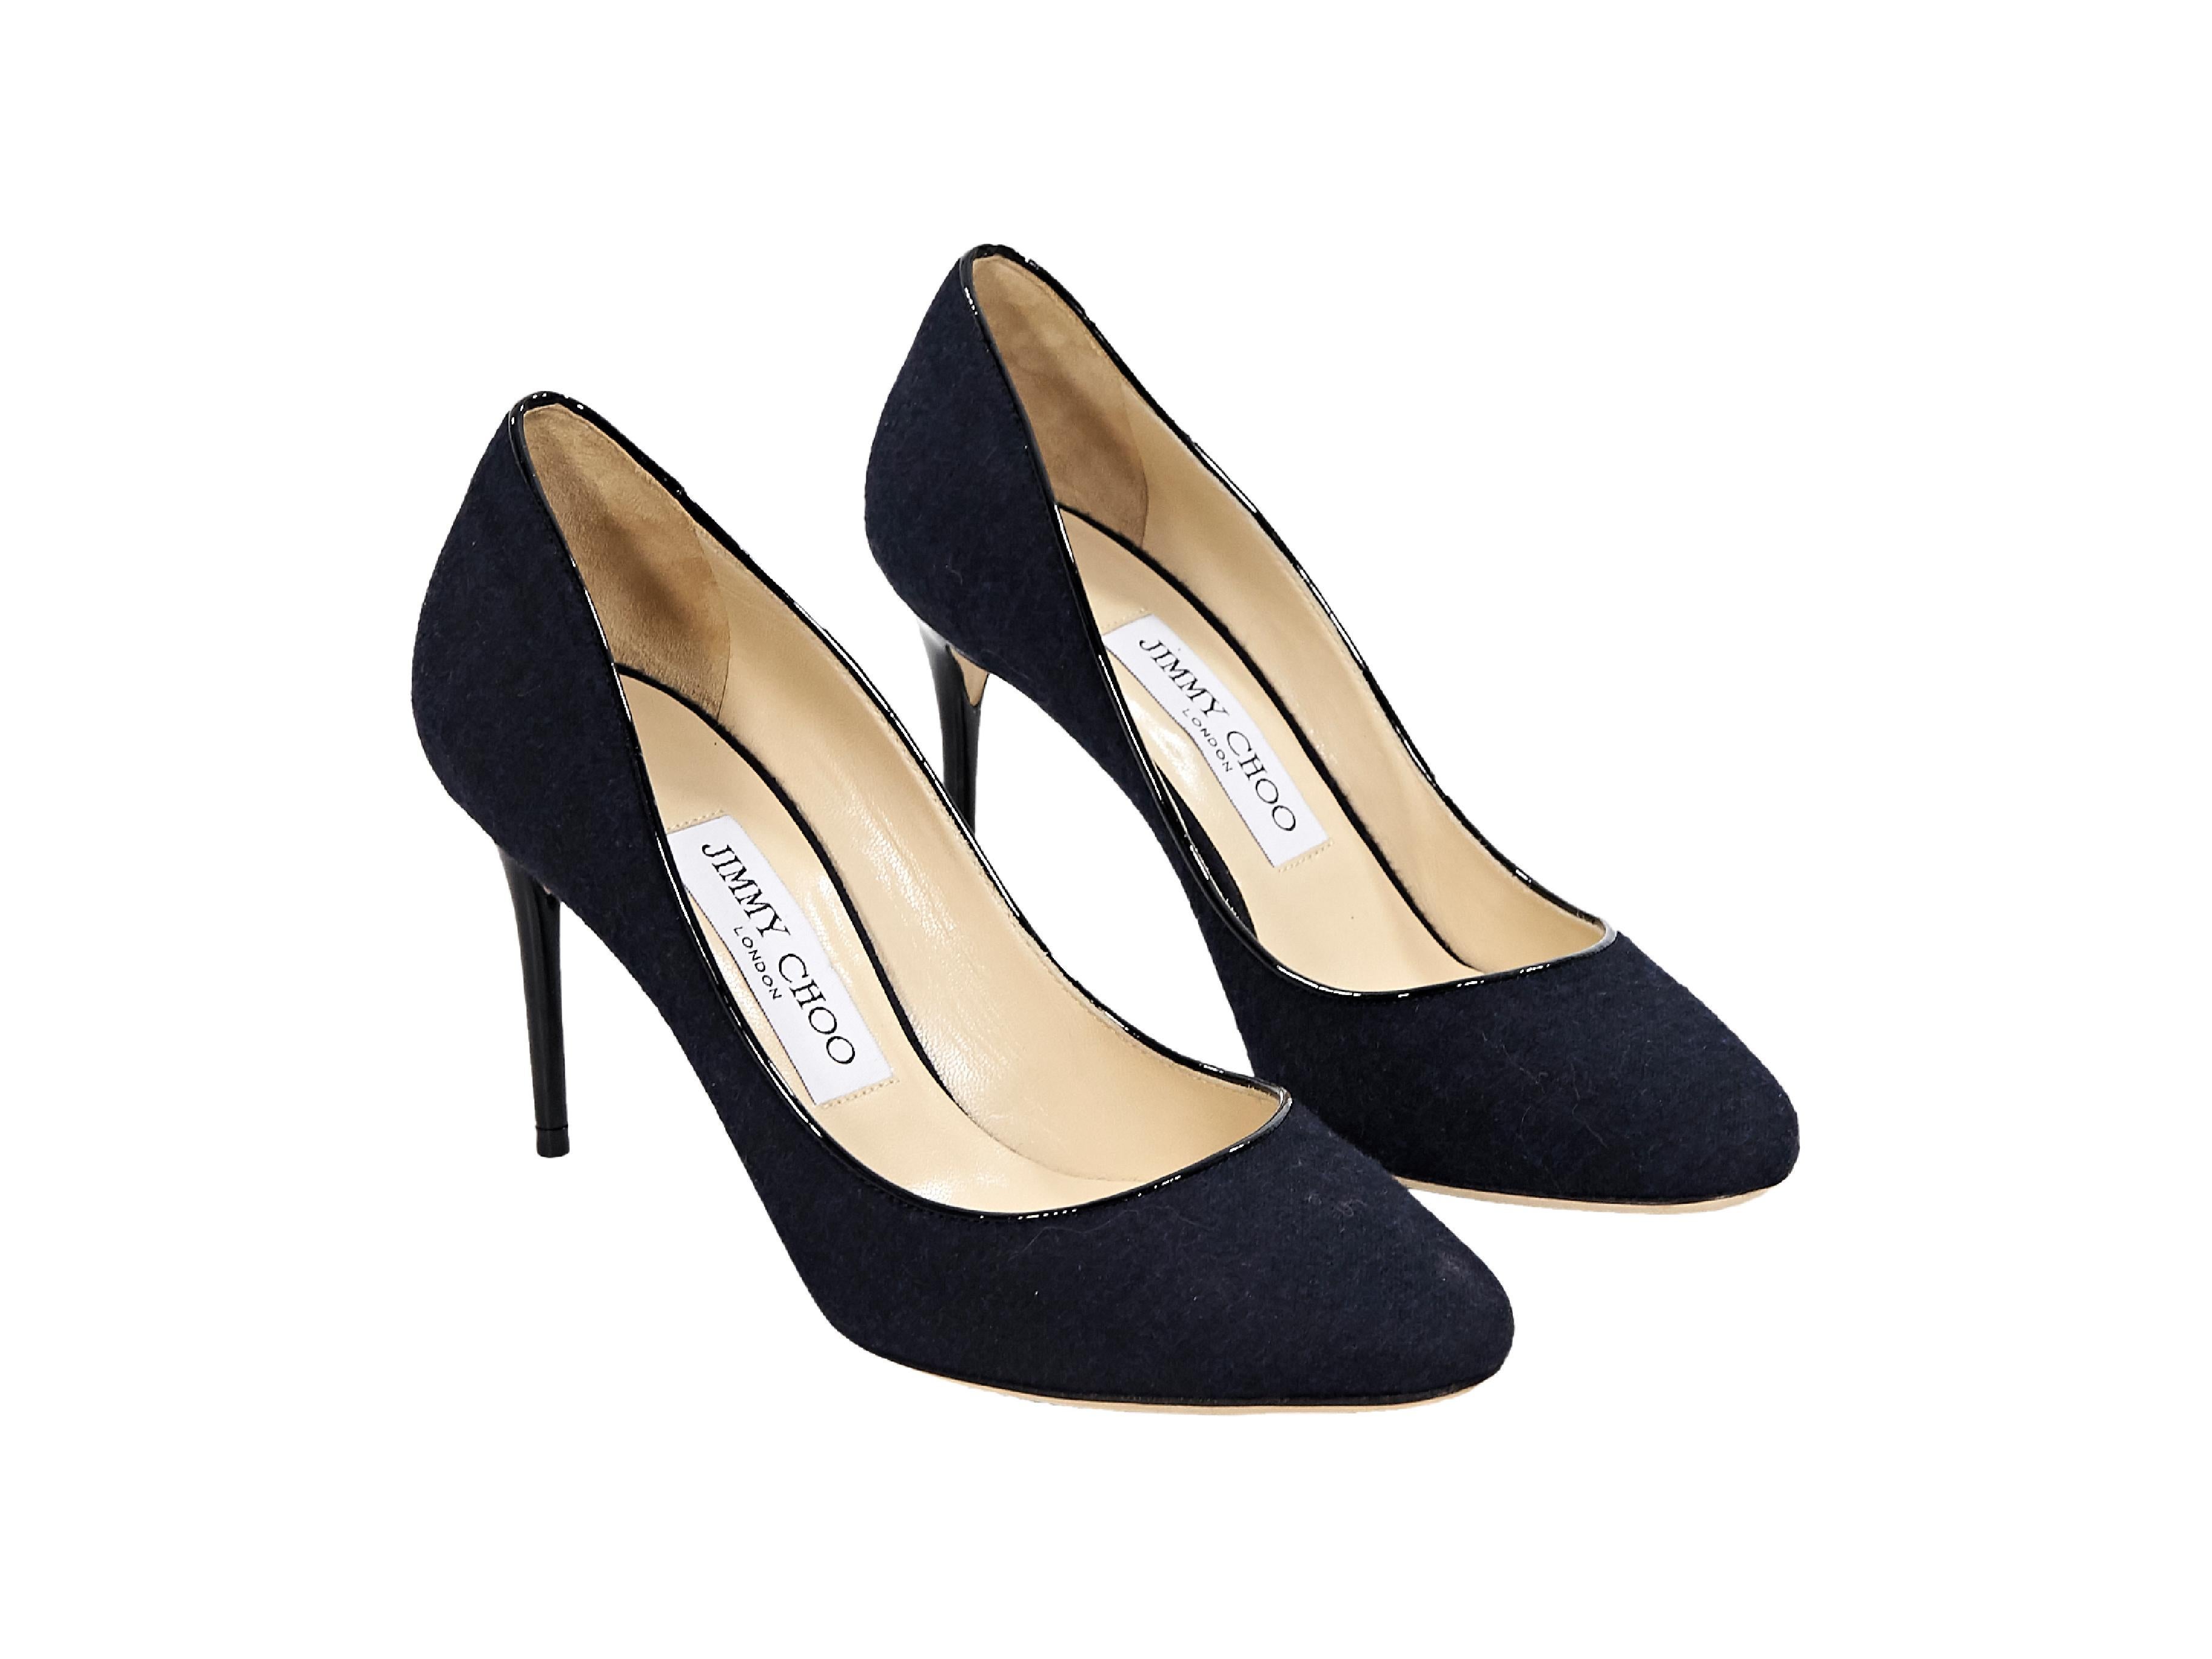 Product details:  Navy blue cashmere pumps by Jimmy Choo.  Round toe.  Leather-wrapped stiletto heel.  Slip-on style.  3.5